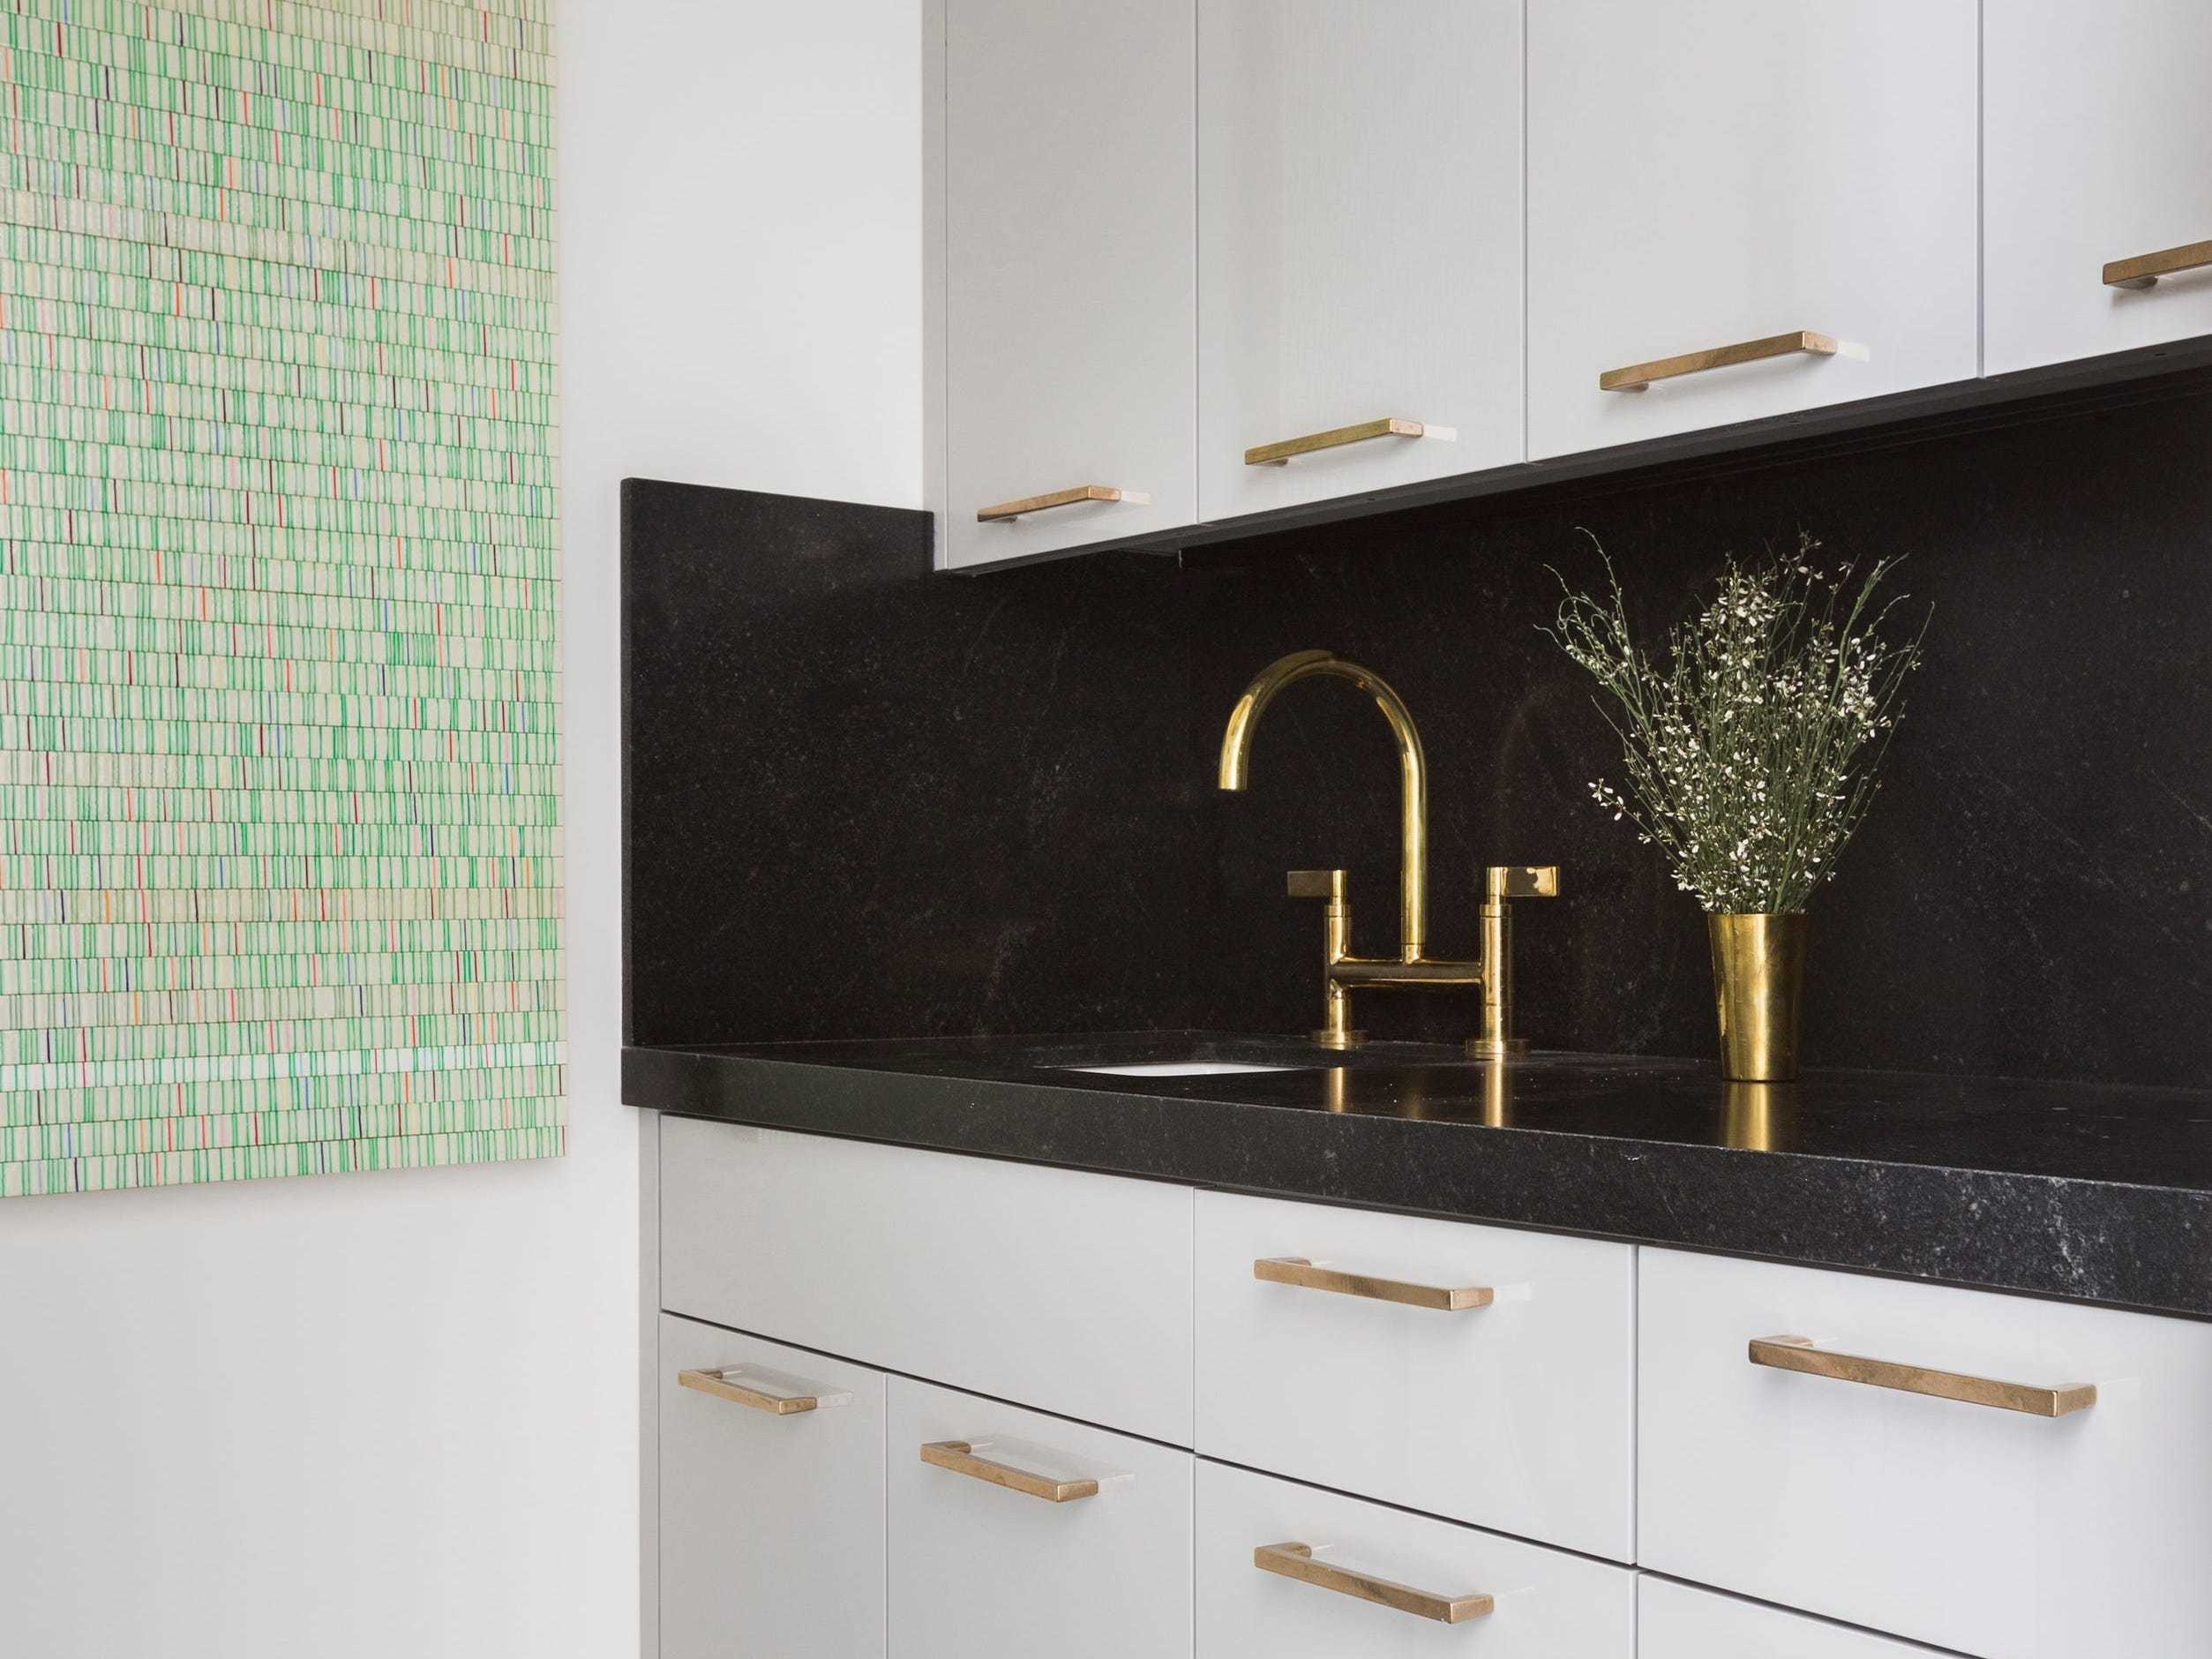 A shot of a gold sink with black tile and white cabinets.